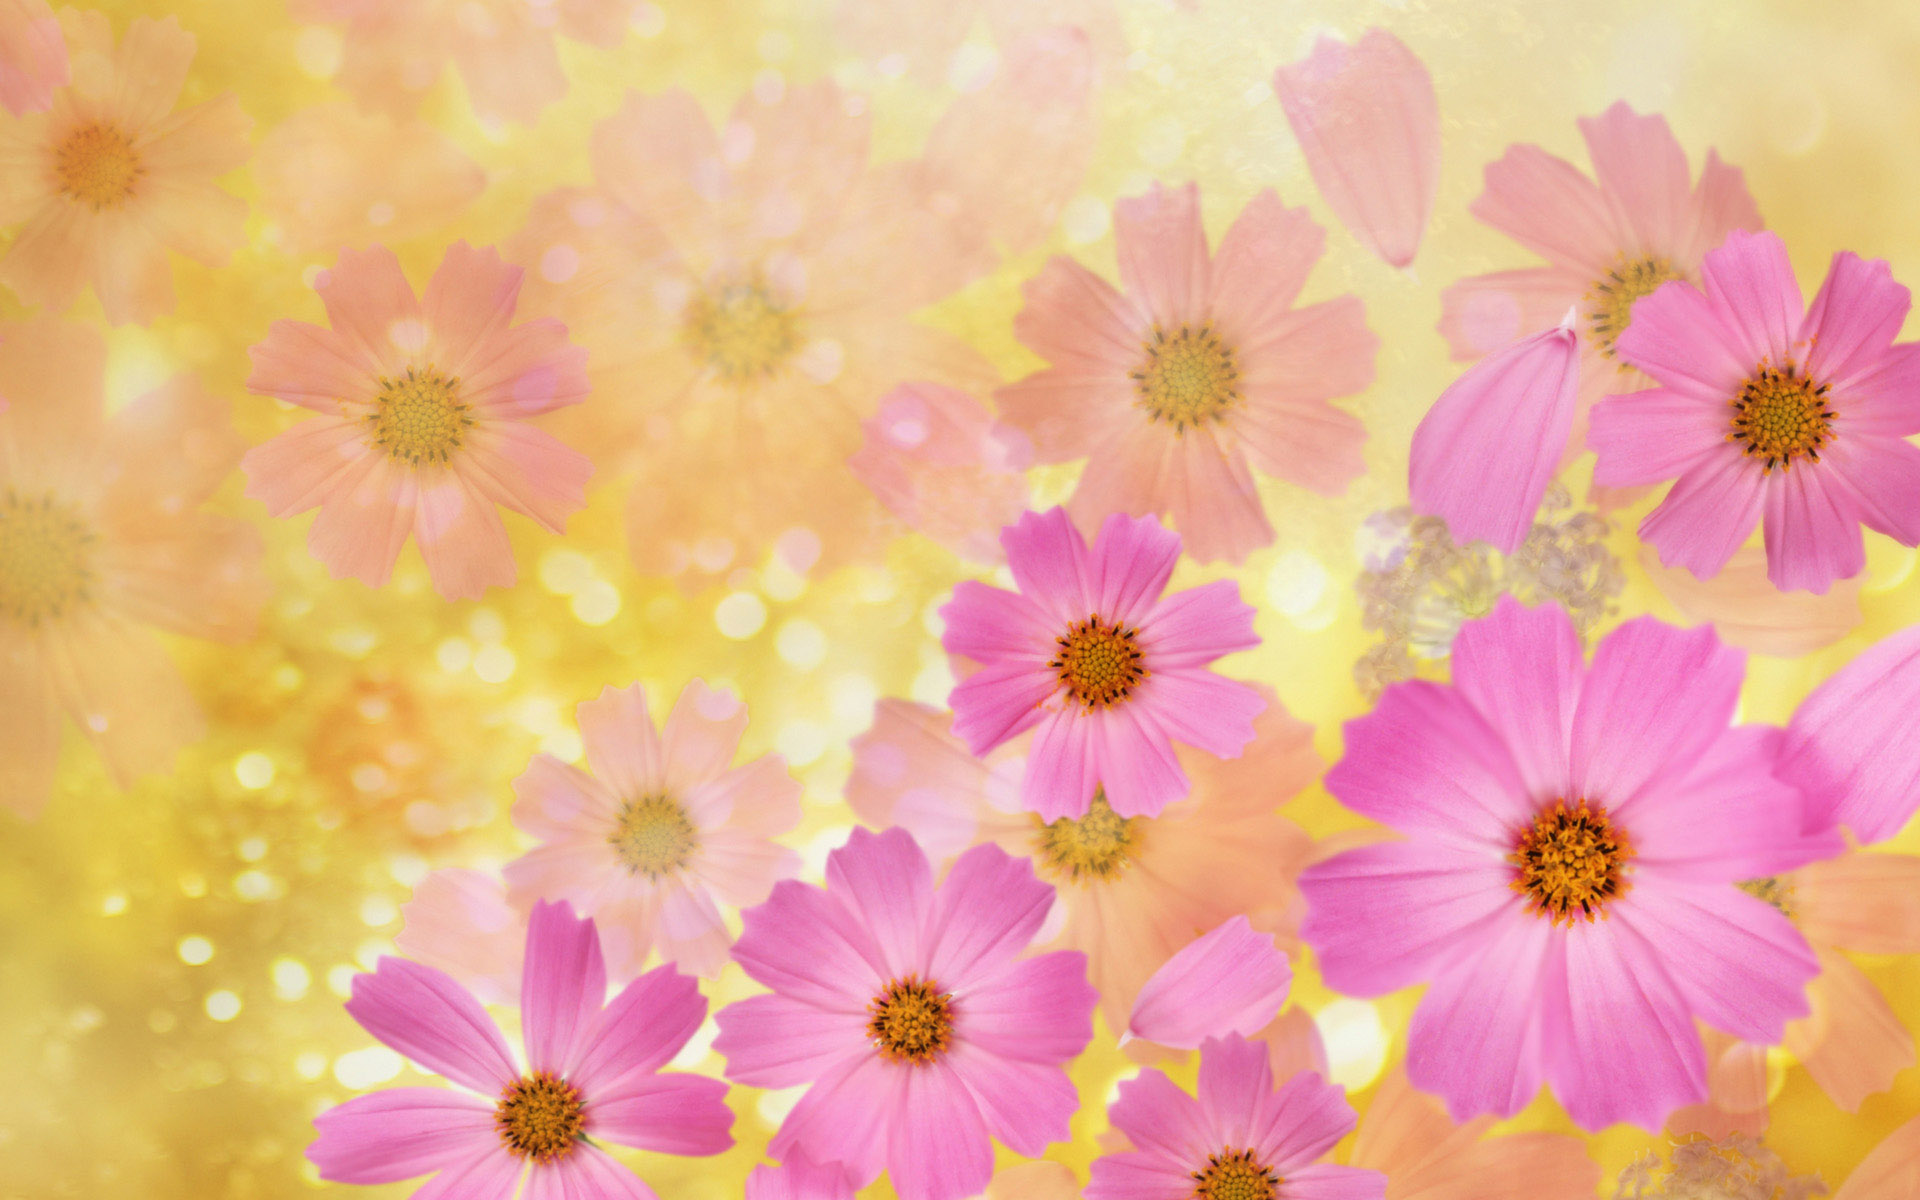 Cosmos flowers Wallpaper High Quality Wallpapers